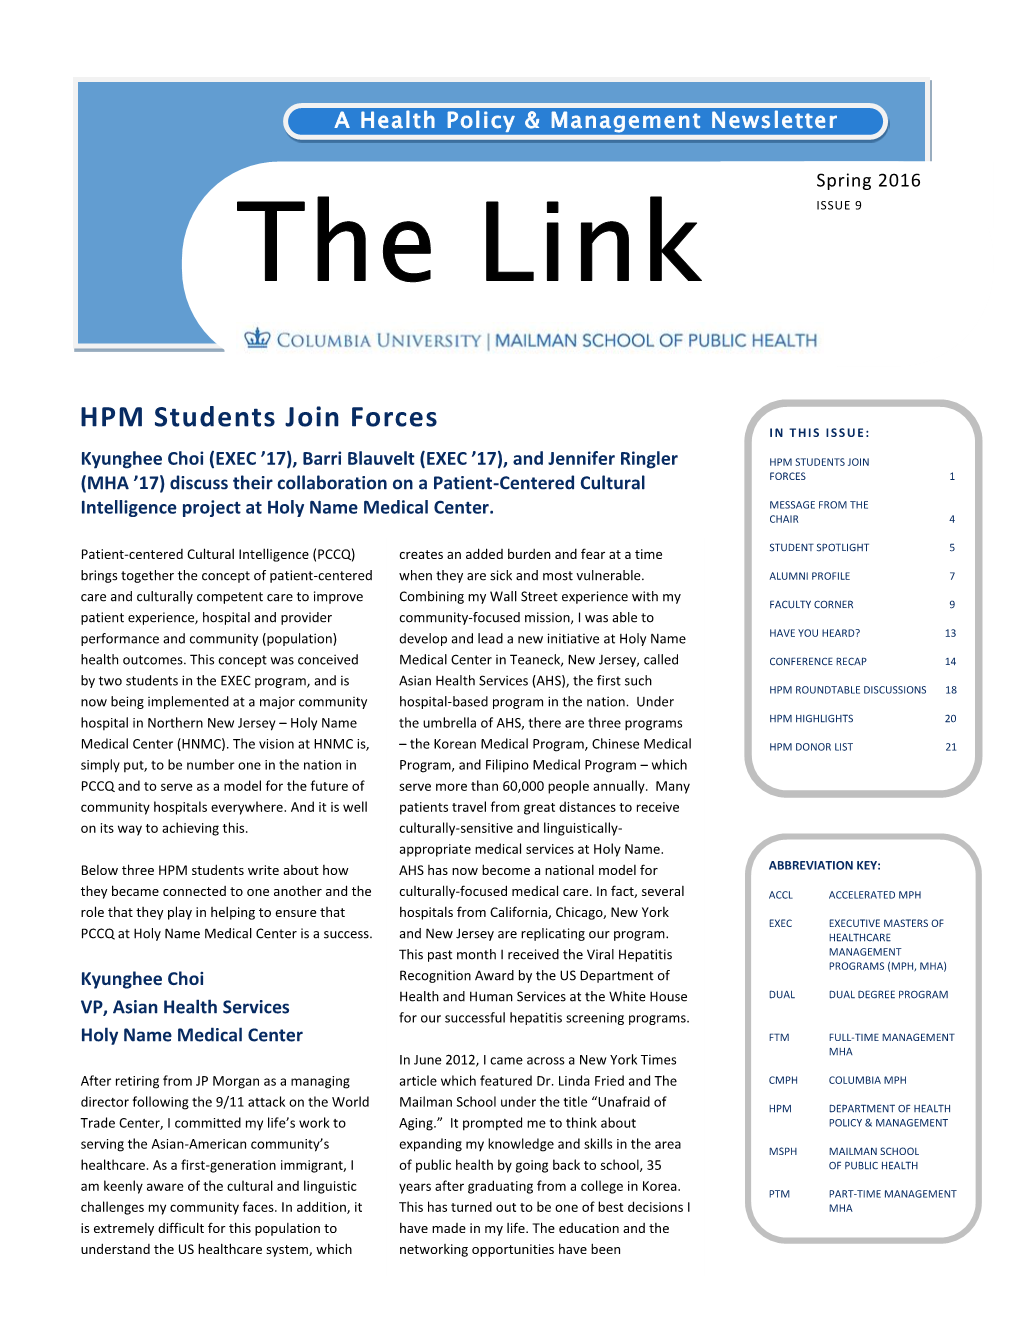 HPM Students Join Forces in THIS ISSUE